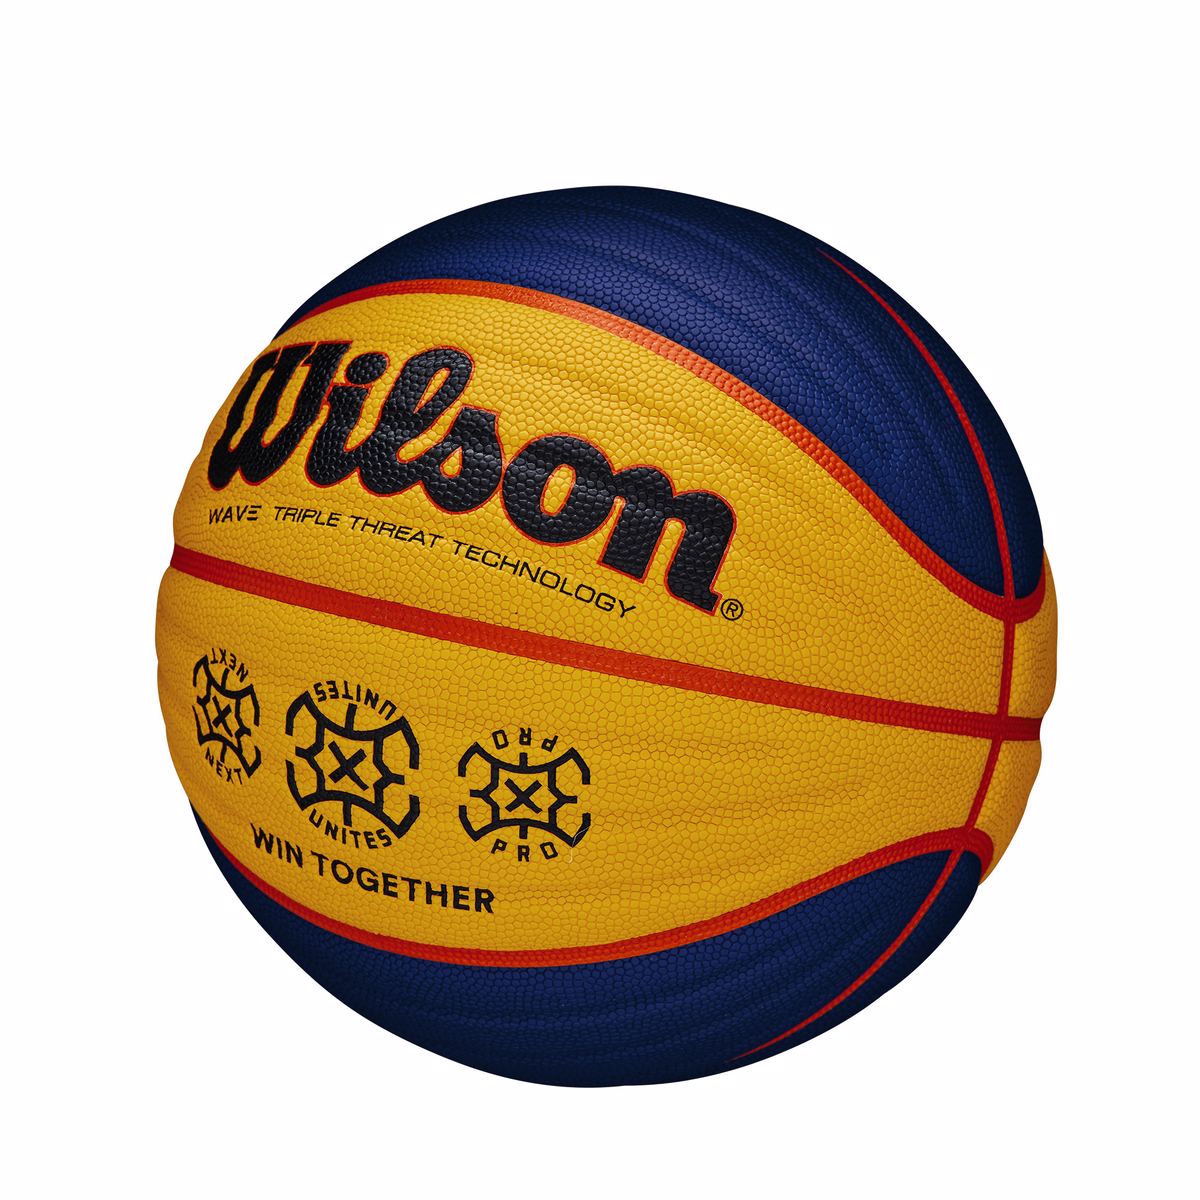 WZ1001801XB_2_6F_FIBA_3X3_Unit_Win_Together_Official_BL_YE_BU_OR.png.high-res_1200x1200